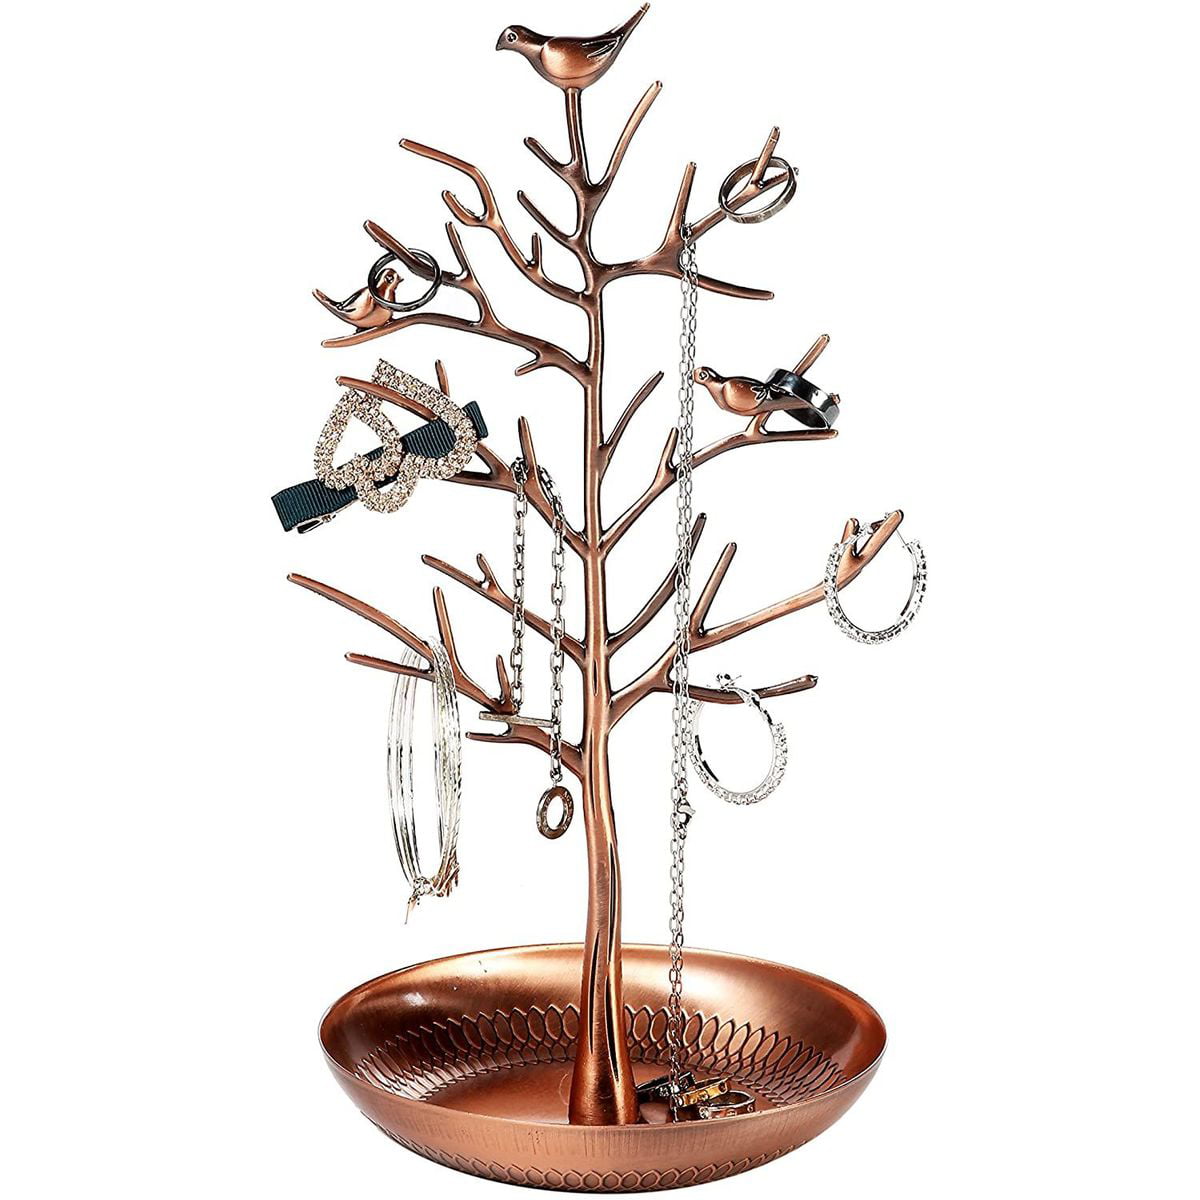 Details about   Jewelry Display Bird Tree Stand Organizer Necklace Ring Earring Holder Show Rack 